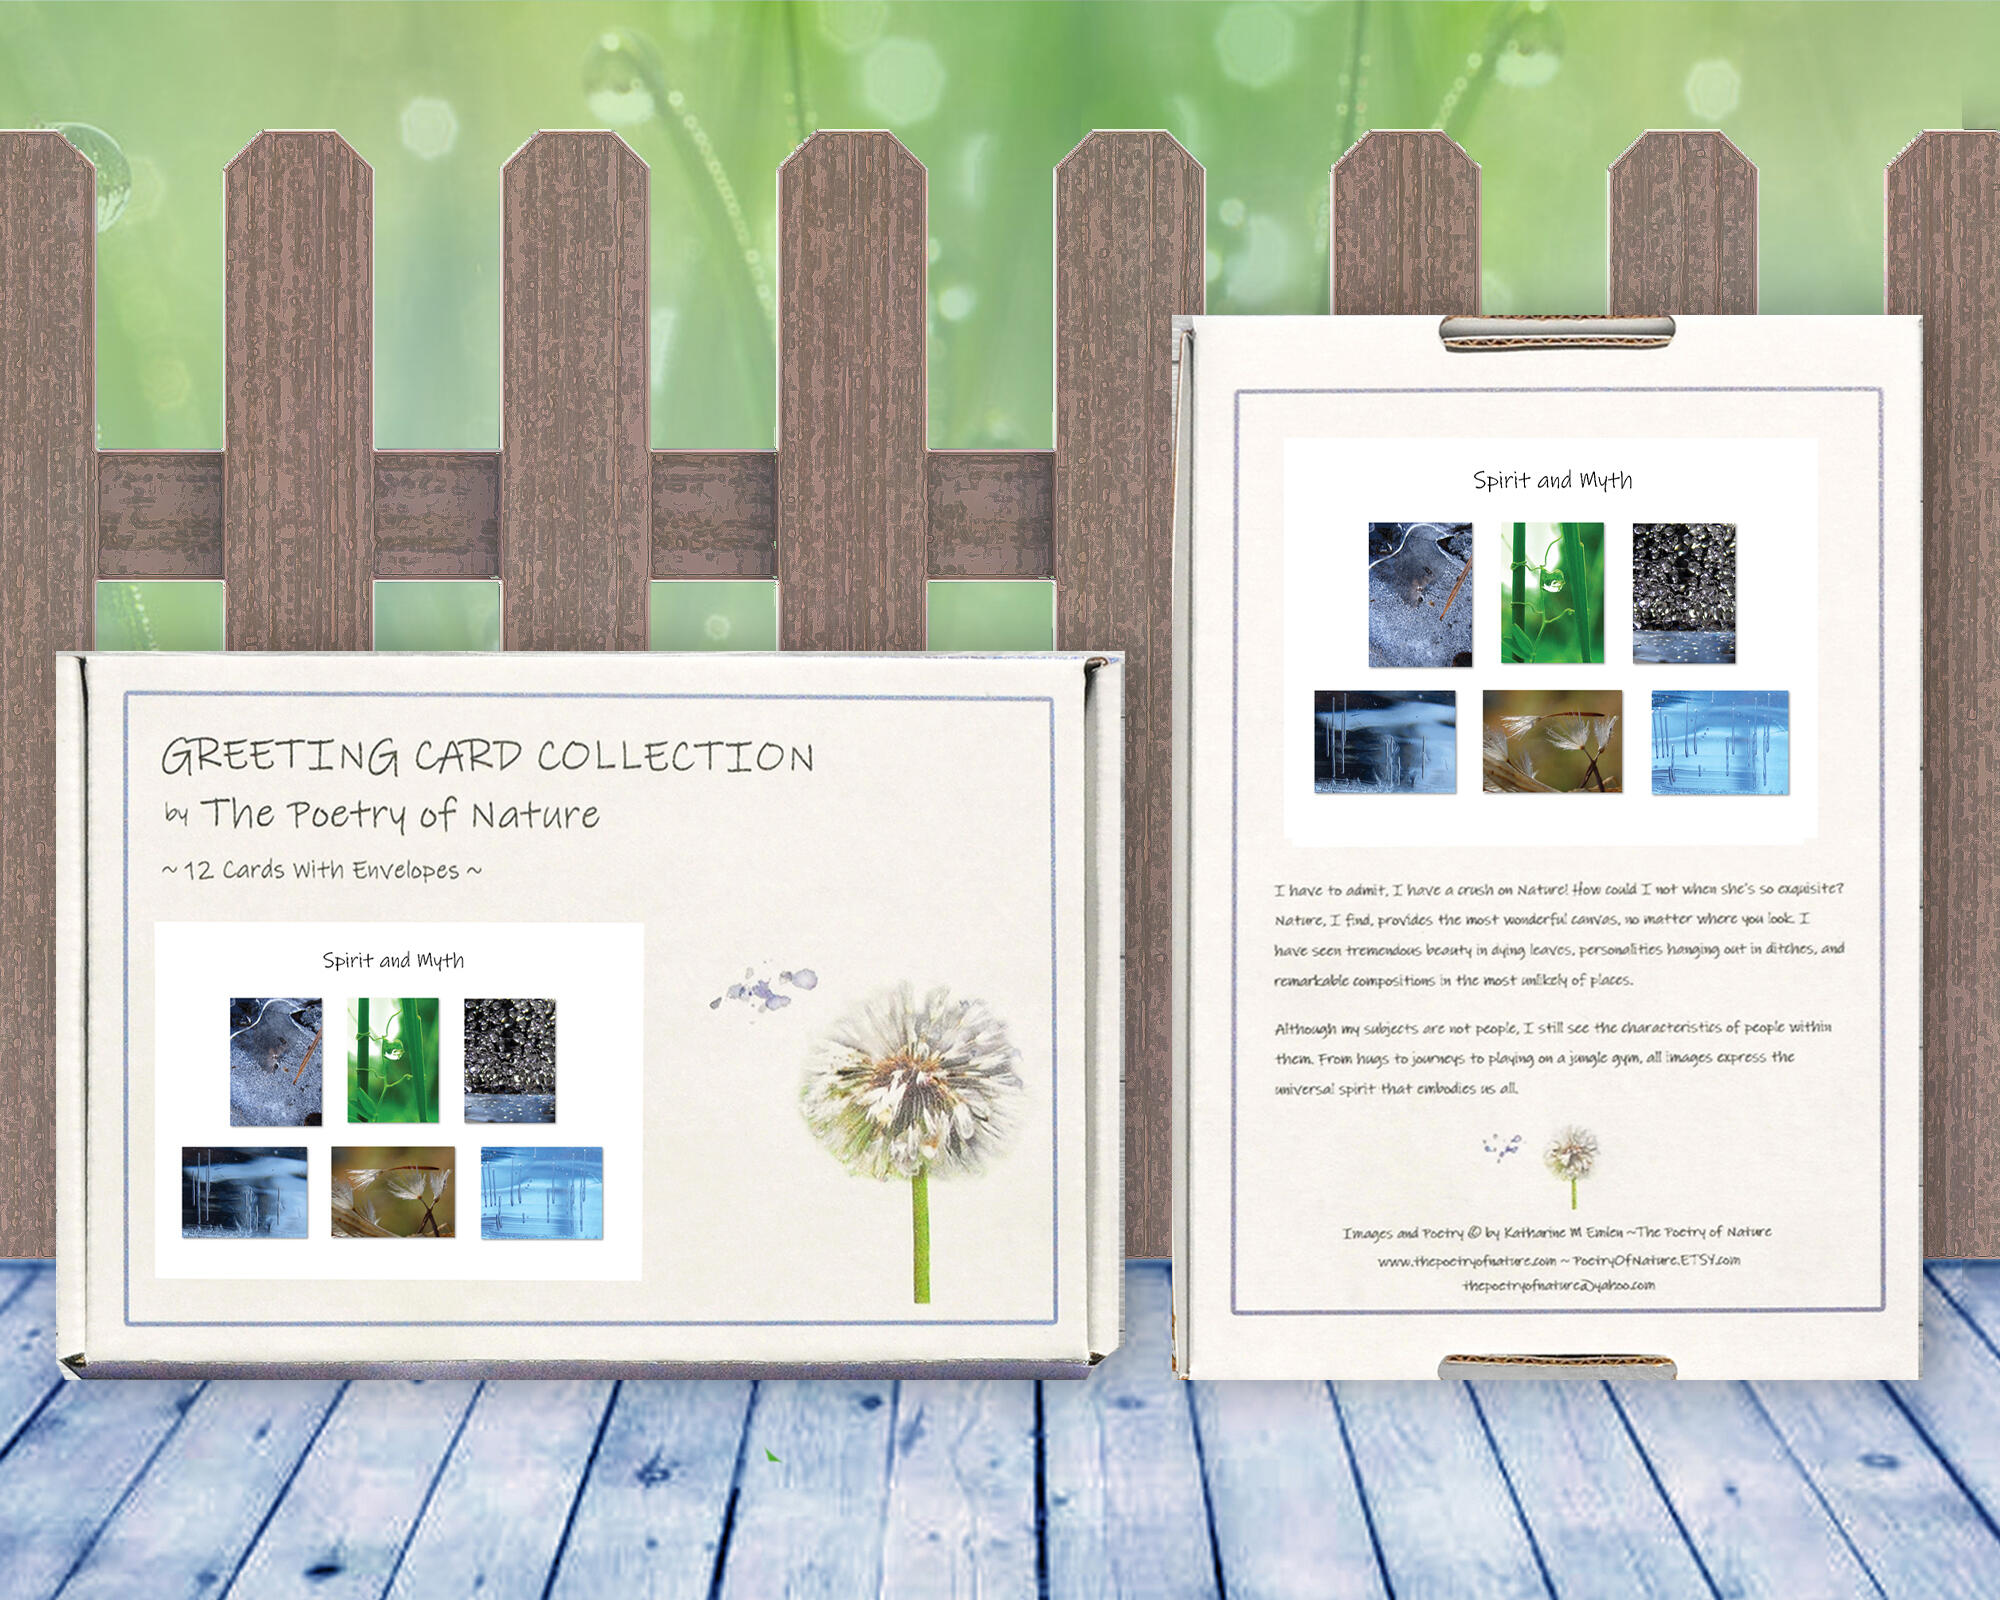 Spirit & Myth greeting card collection by The Poetry of Nature, Stories in nature photo cards with poems. Boxed Set Baker's Dozen